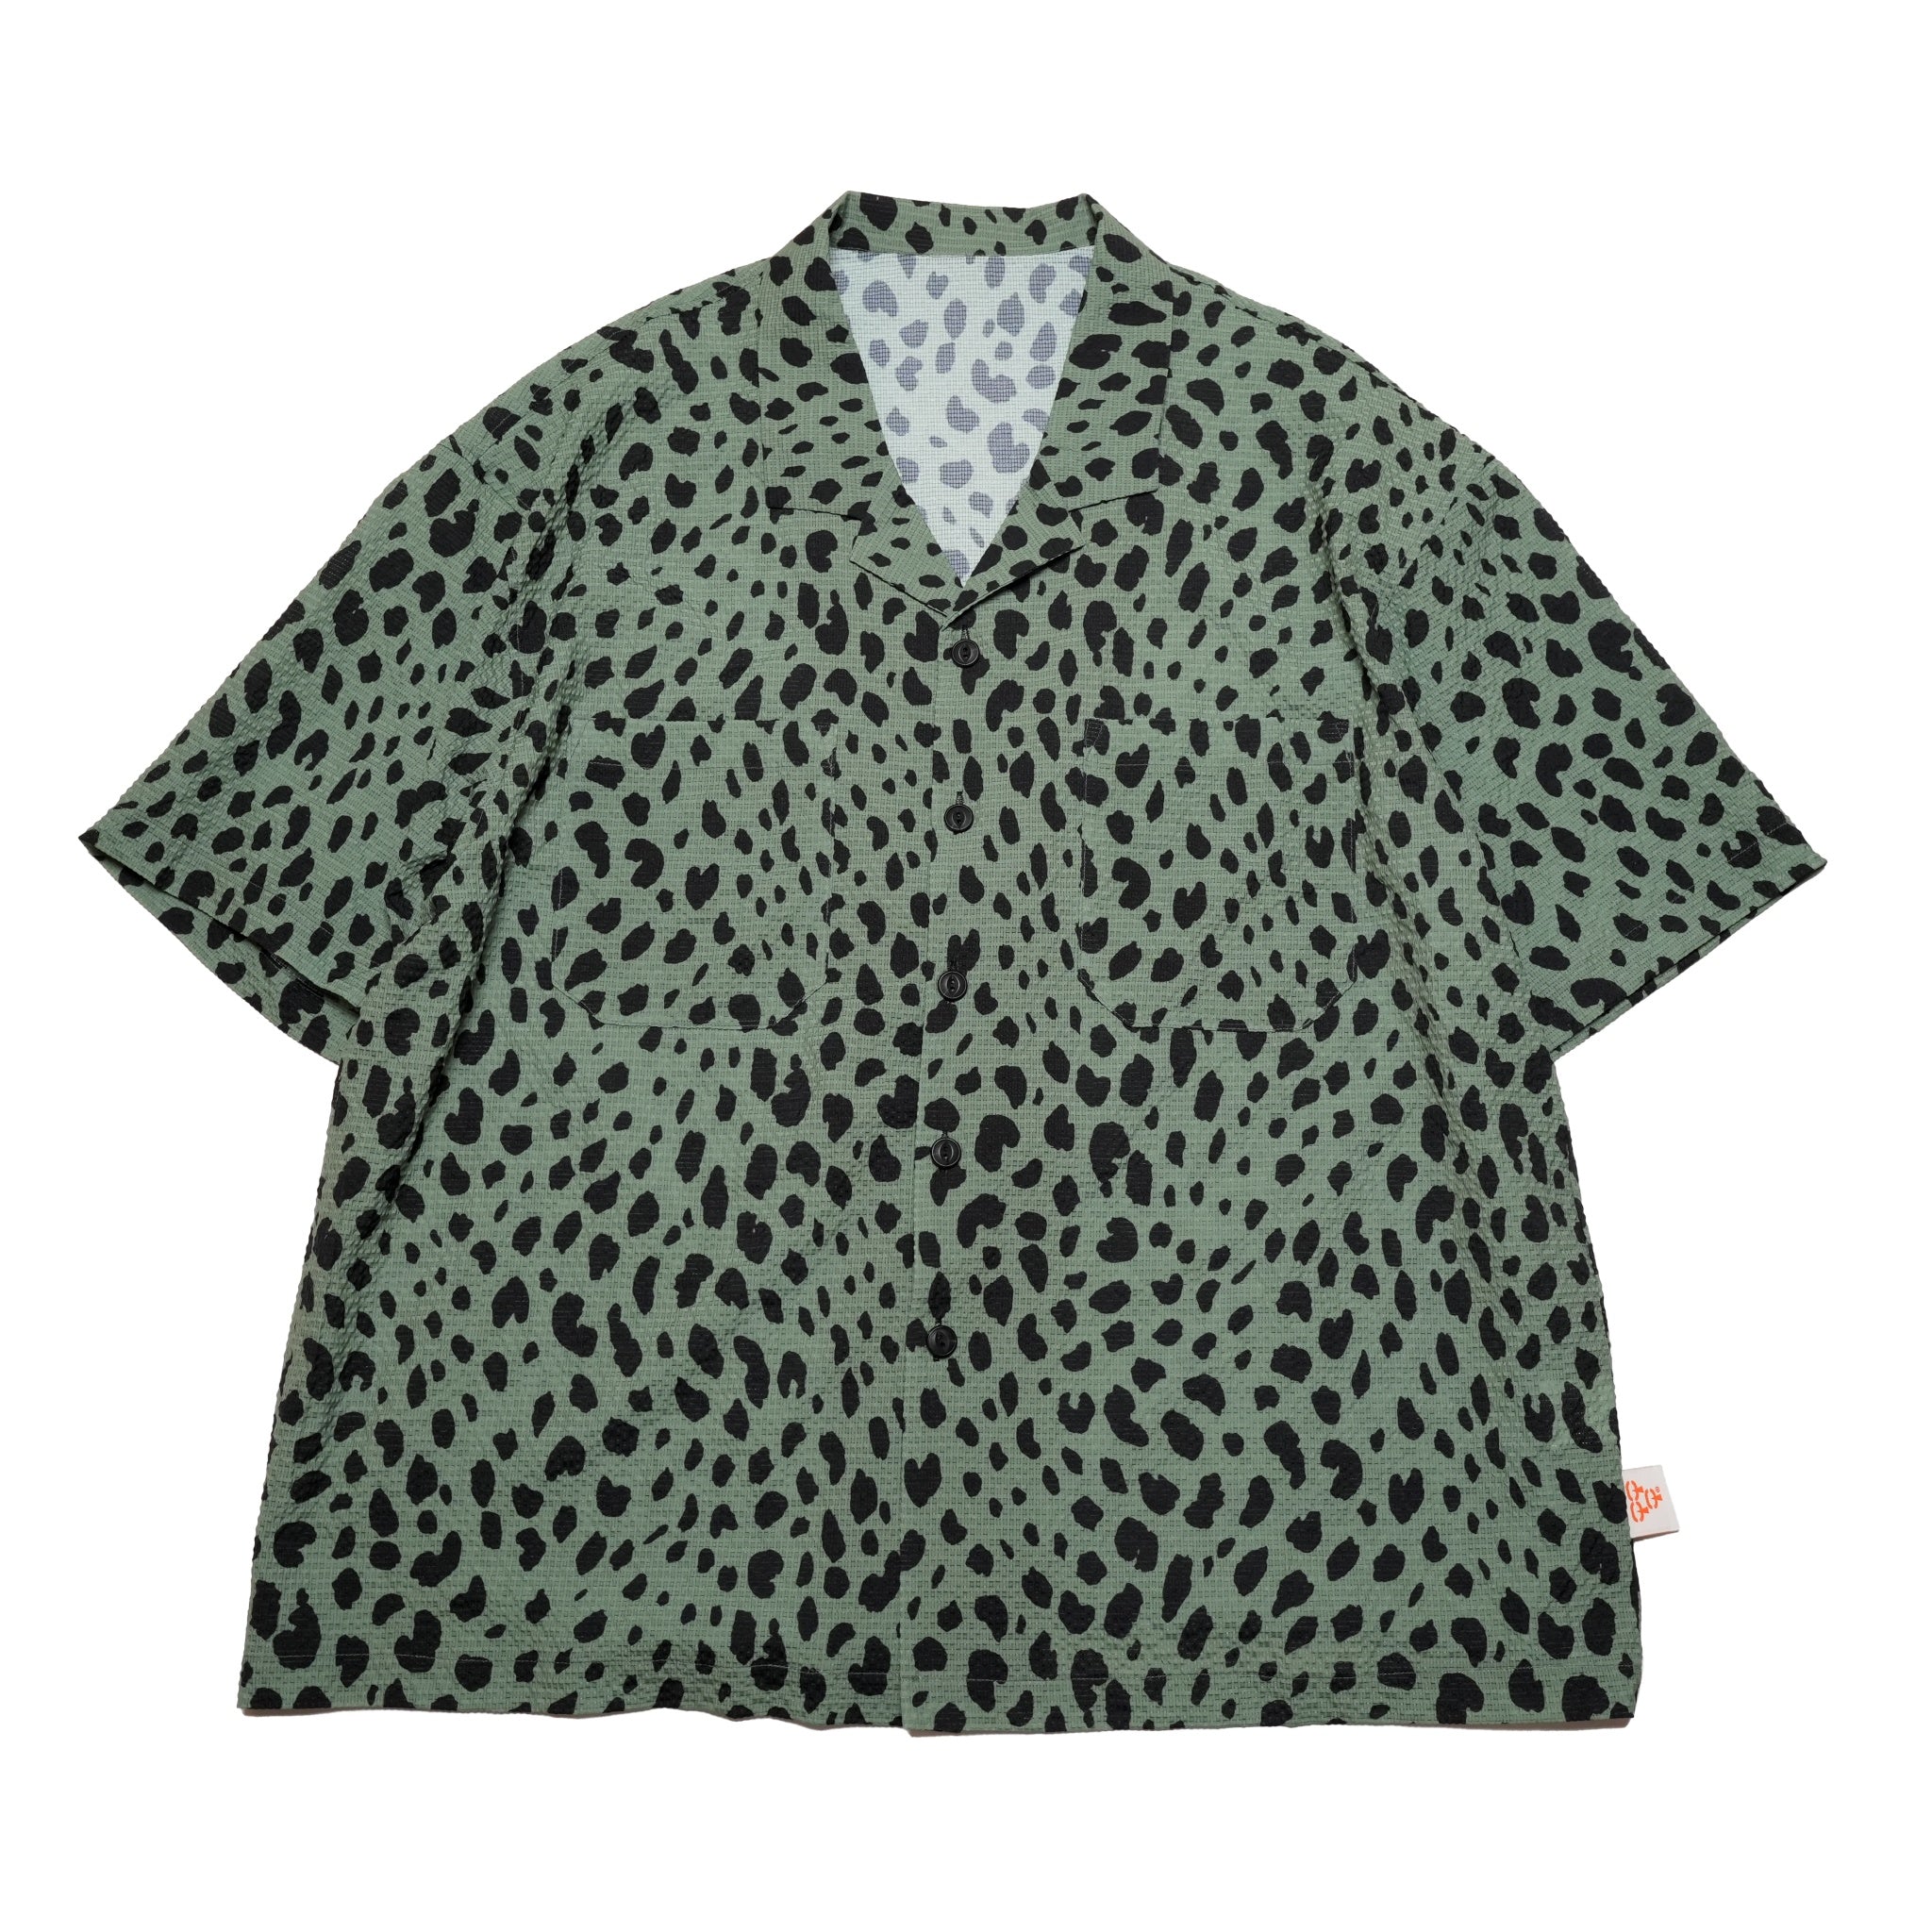 No:G62201_GN | Name:LEOPARD ALOHA SHIRTS-GN | COlor:Green【GORT_ゴート】